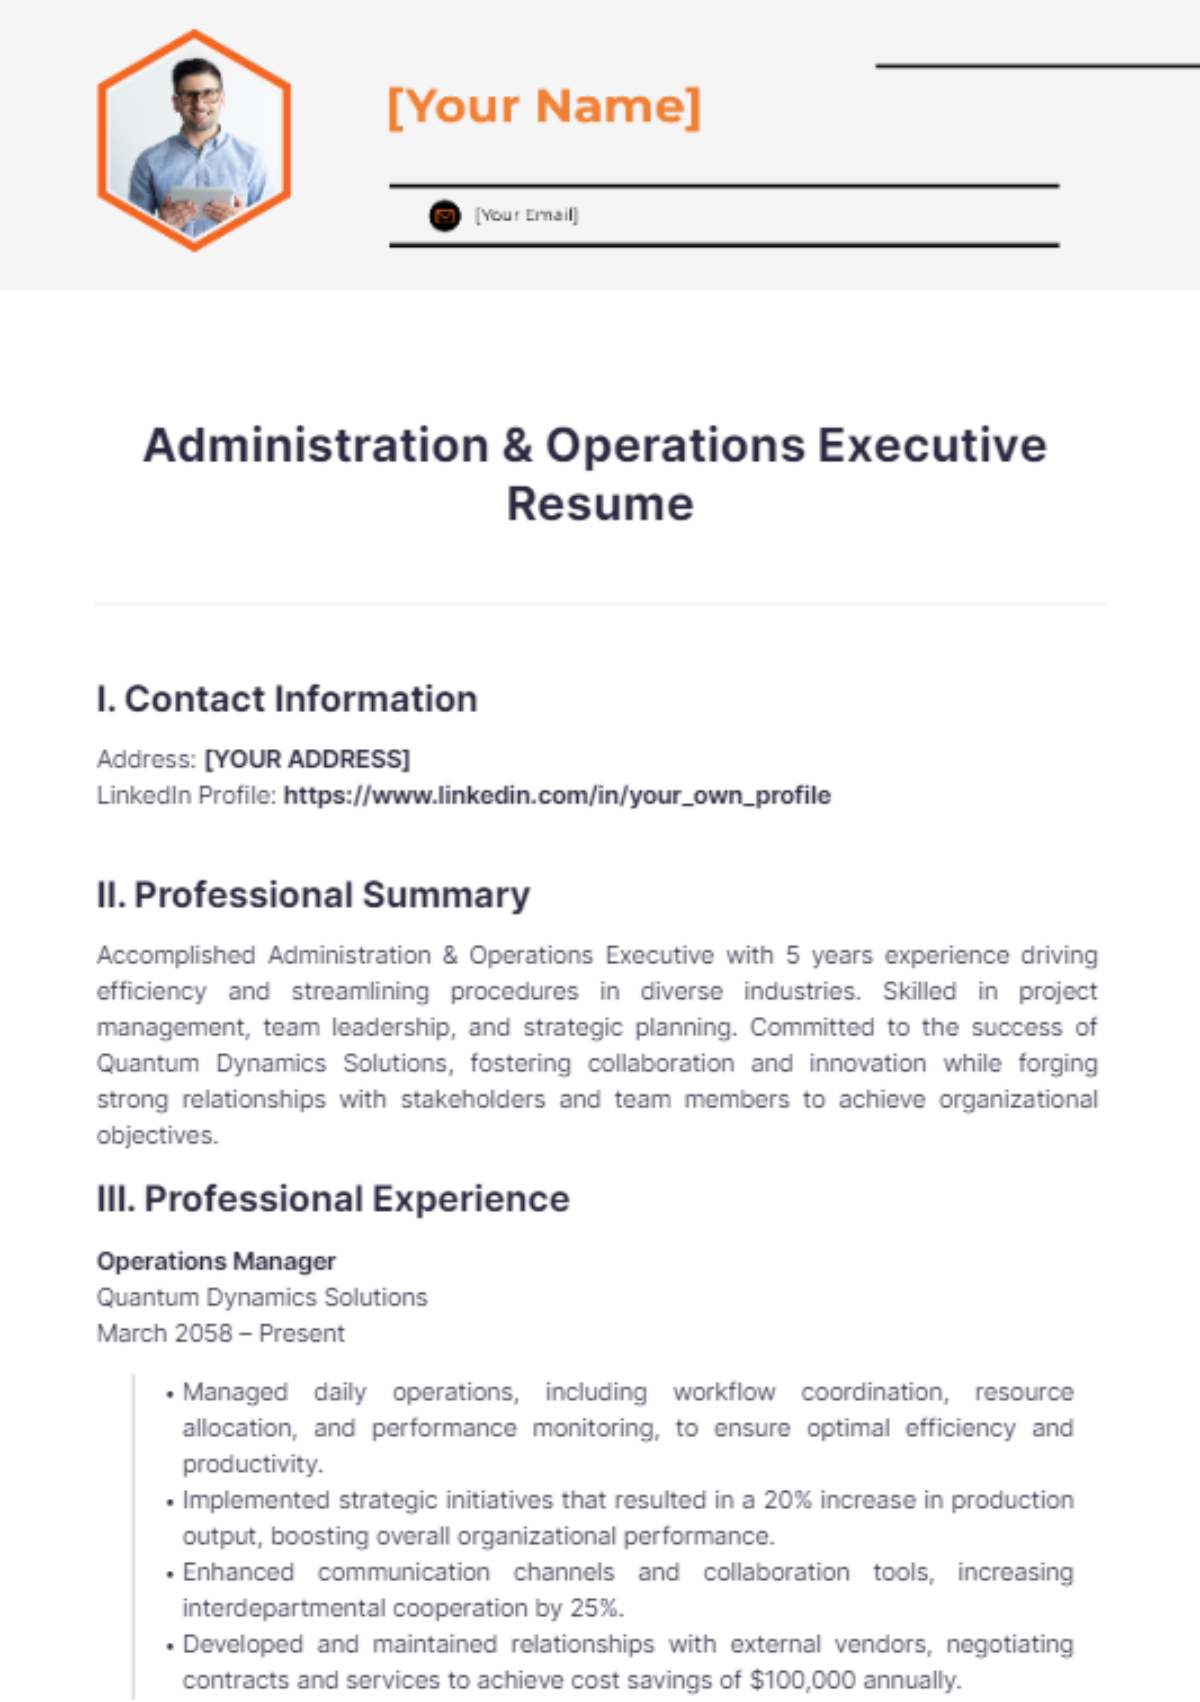 Free Administration & Operations Executive Resume